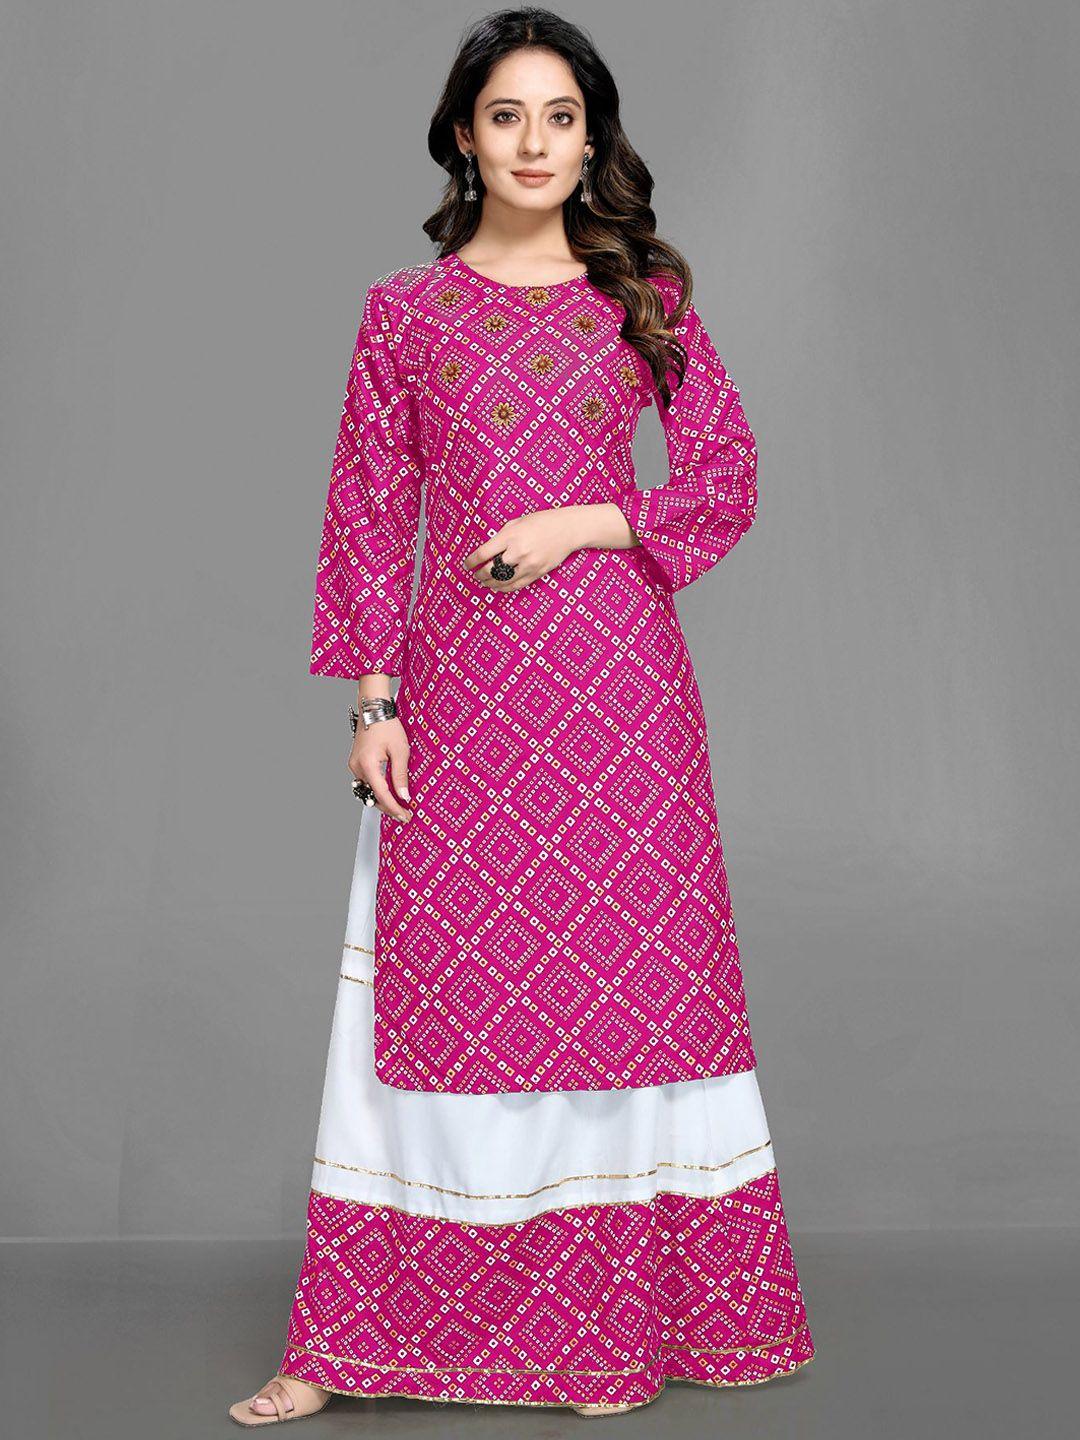 queenswear creation women pink ethnic motifs printed beads and stones kurta with skirt